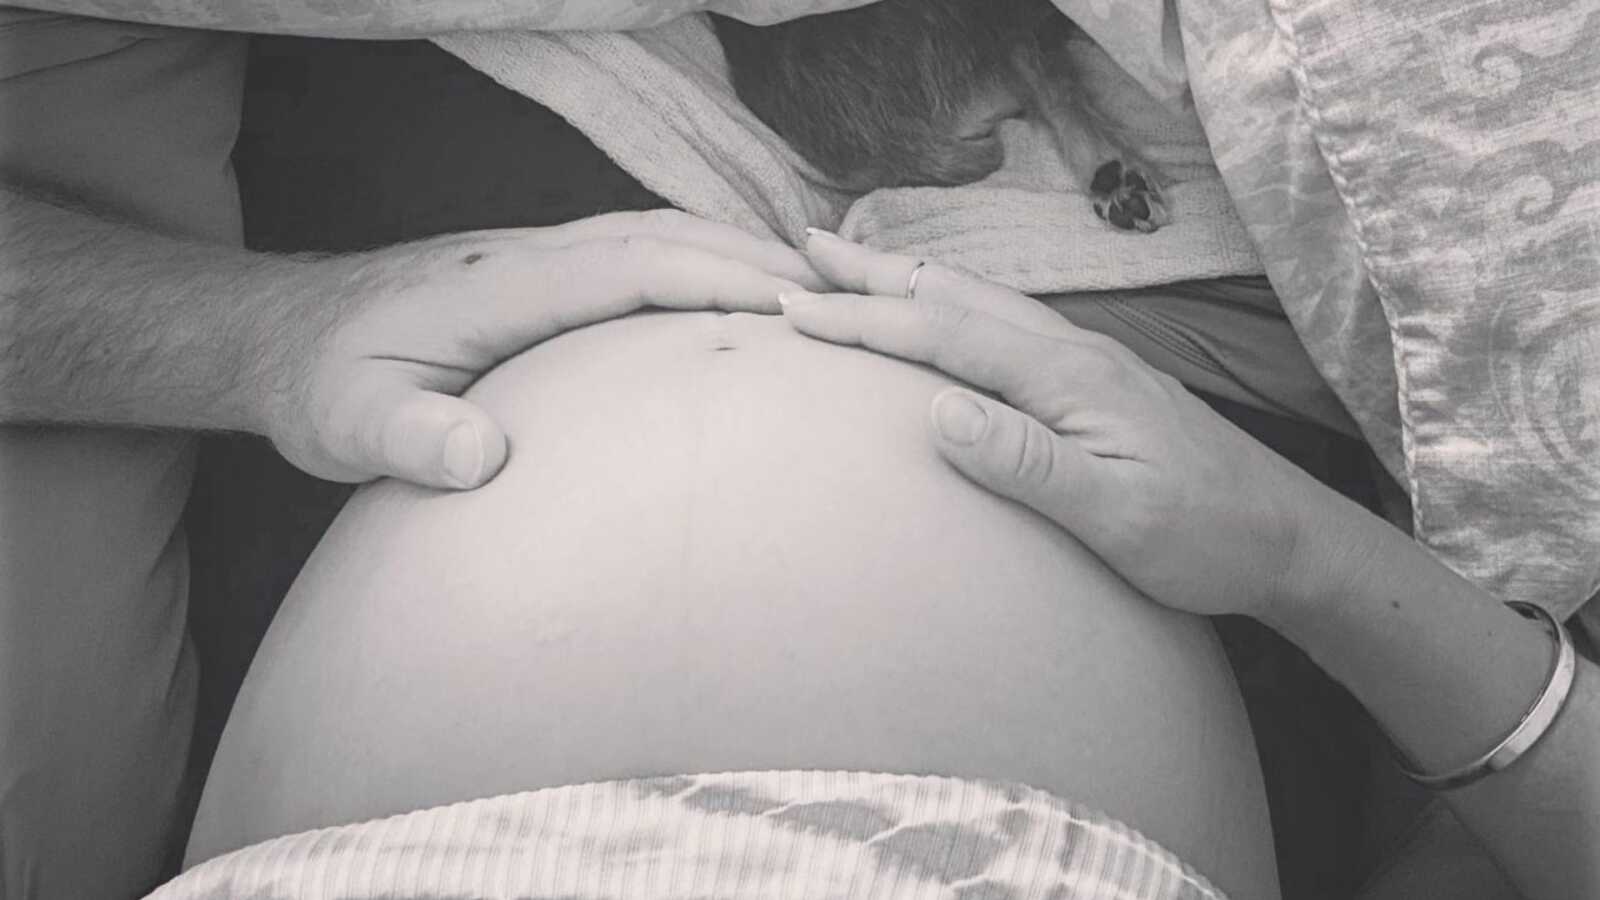 Expectant parents place their hands on a mother's exposed pregnant belly